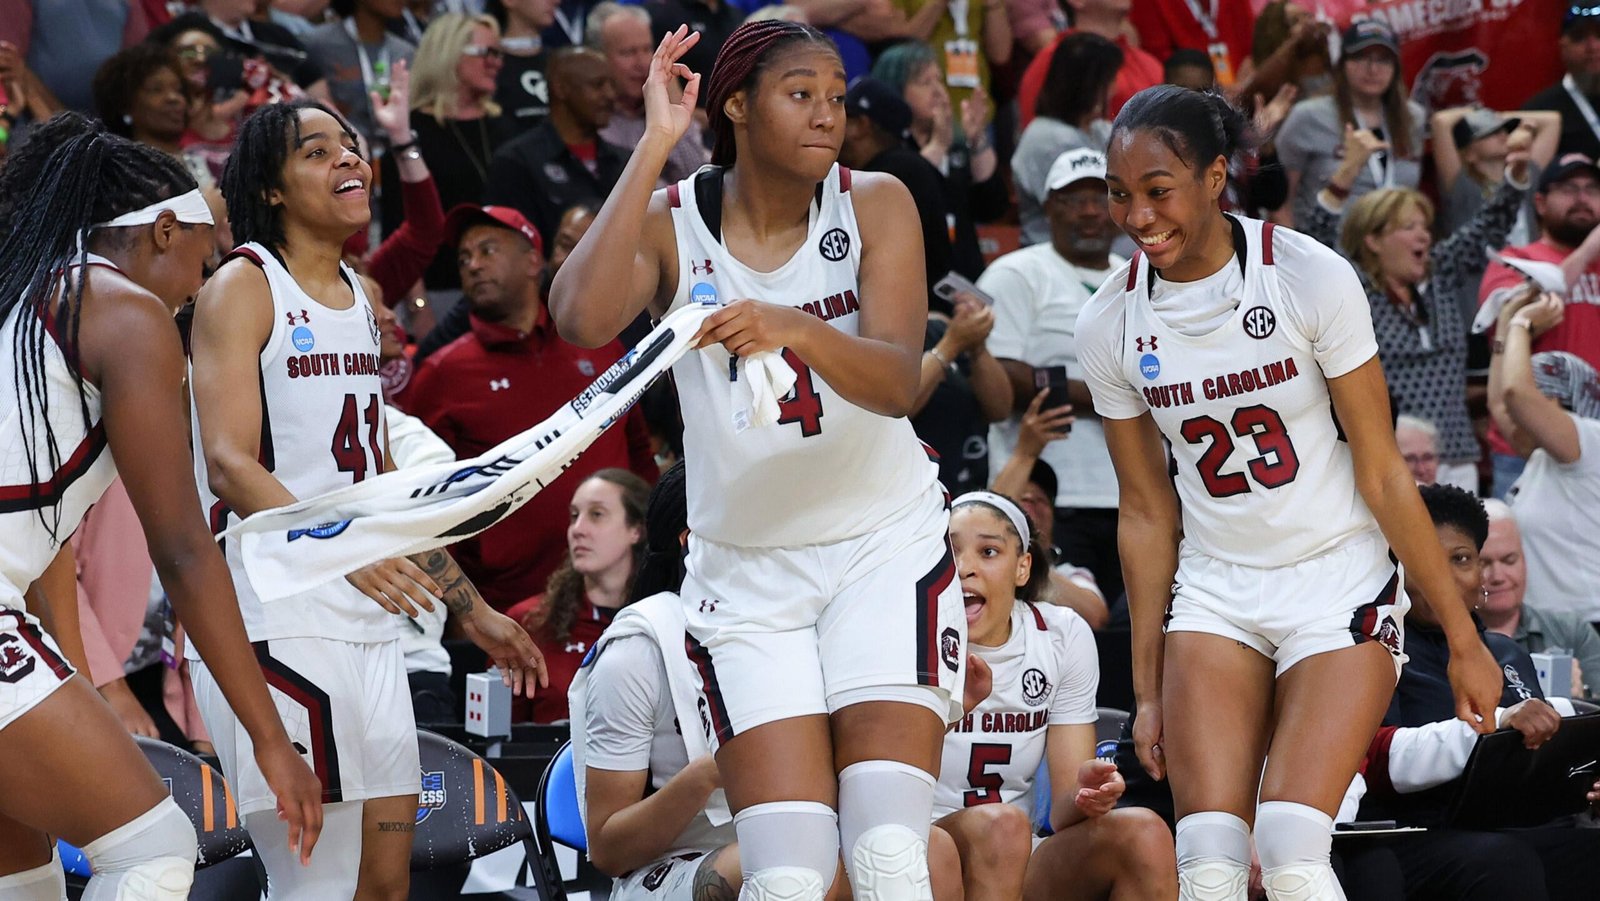 2023 Women’s Final Four: How to watch, stream, schedule, dates, for the national semifinals and championship